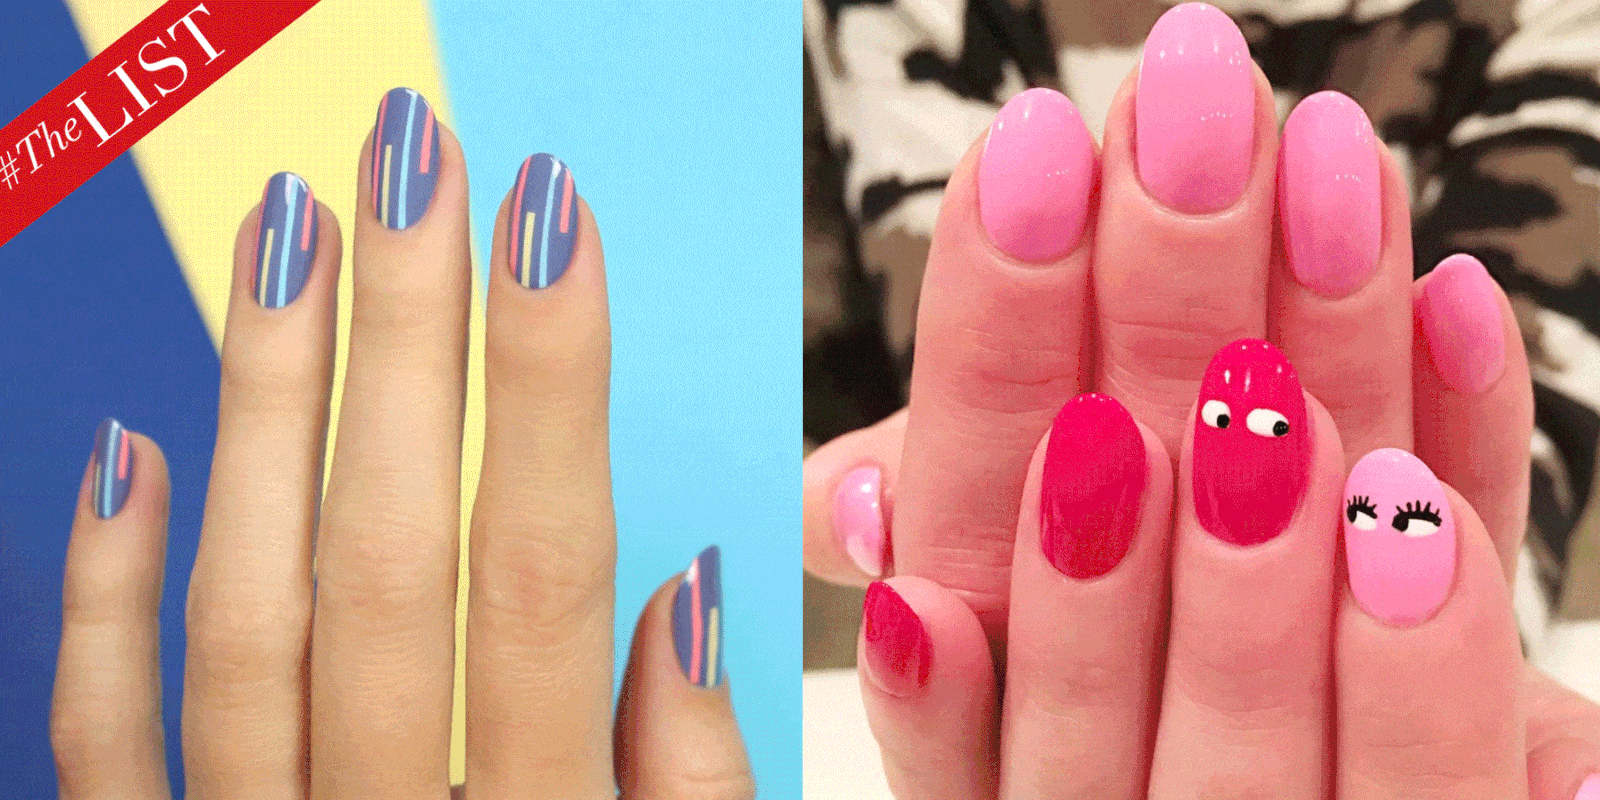 2. Tropical Nail Designs for Summer - wide 9